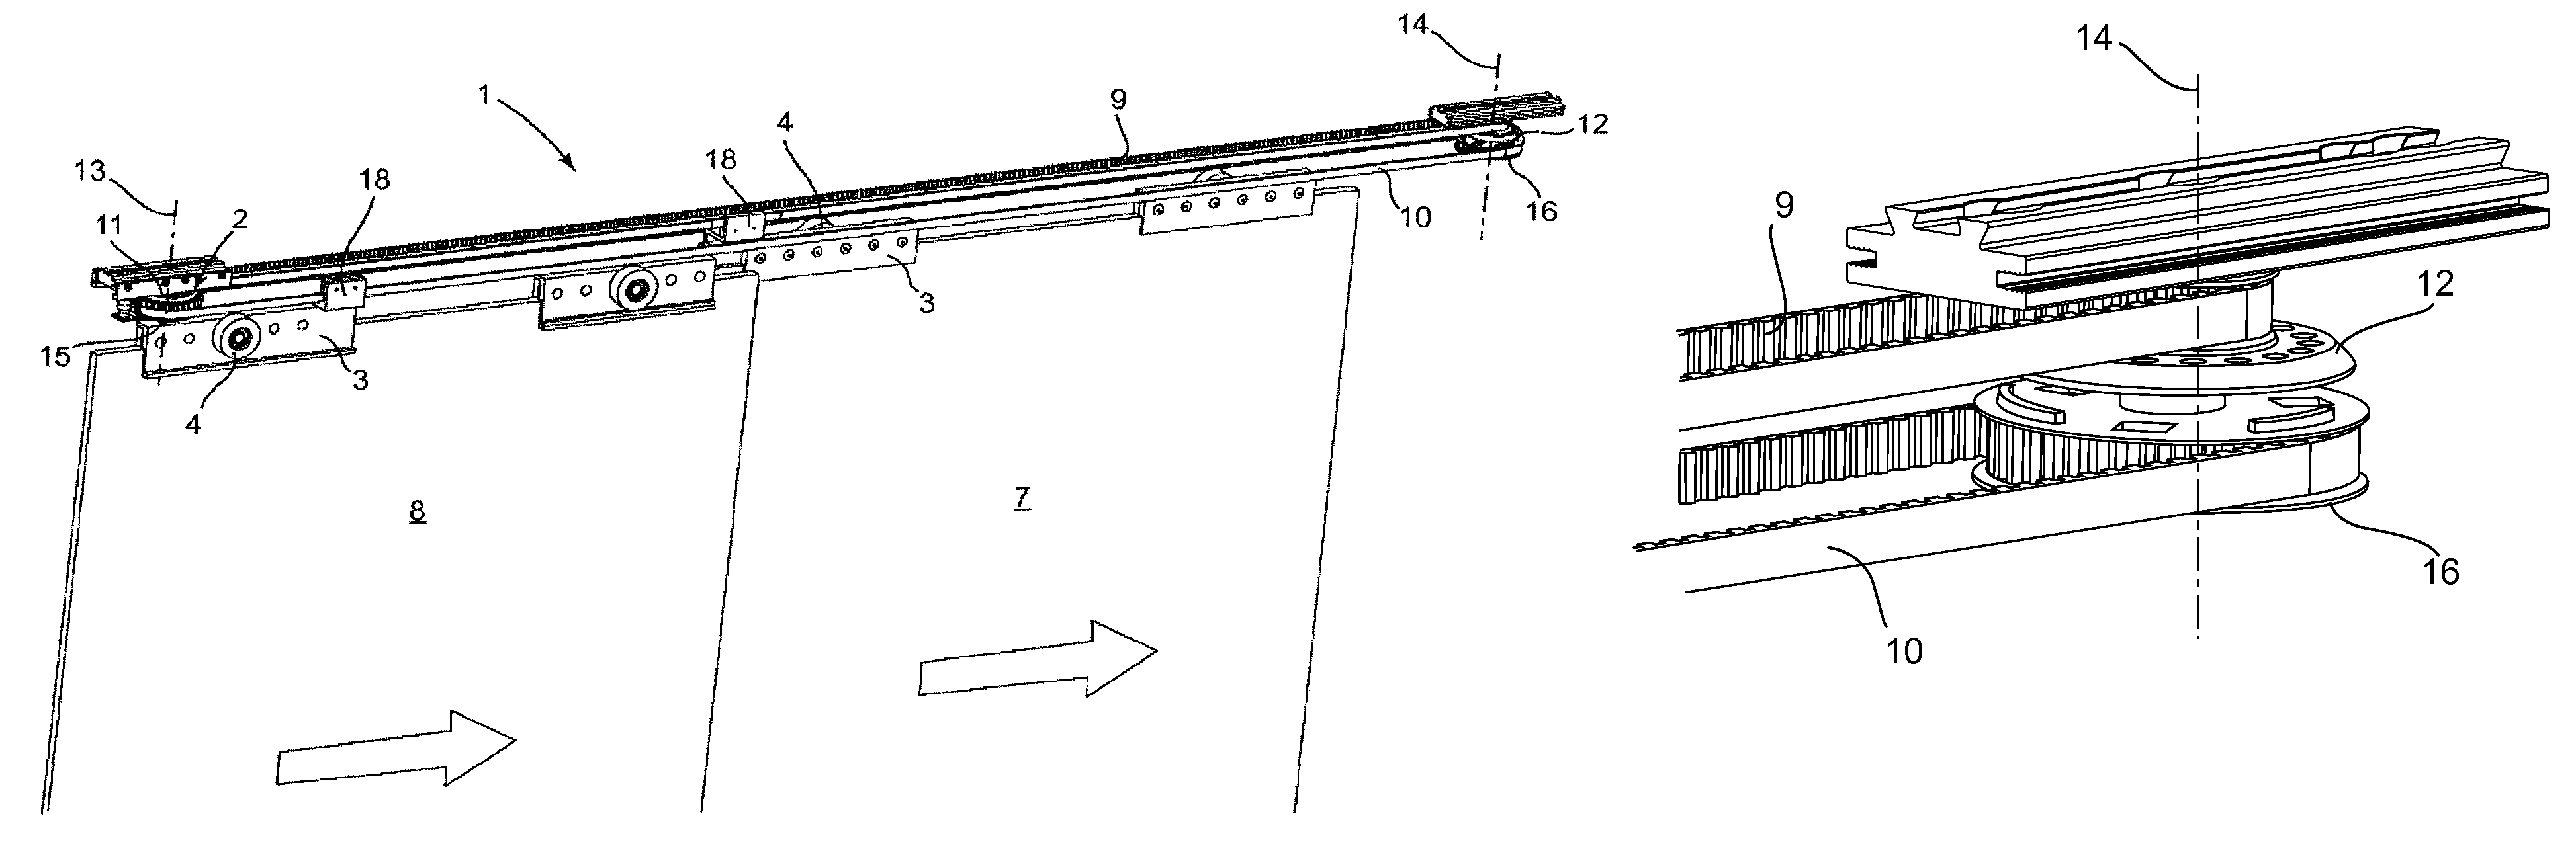 Simultaneous displacement device for sliding doors